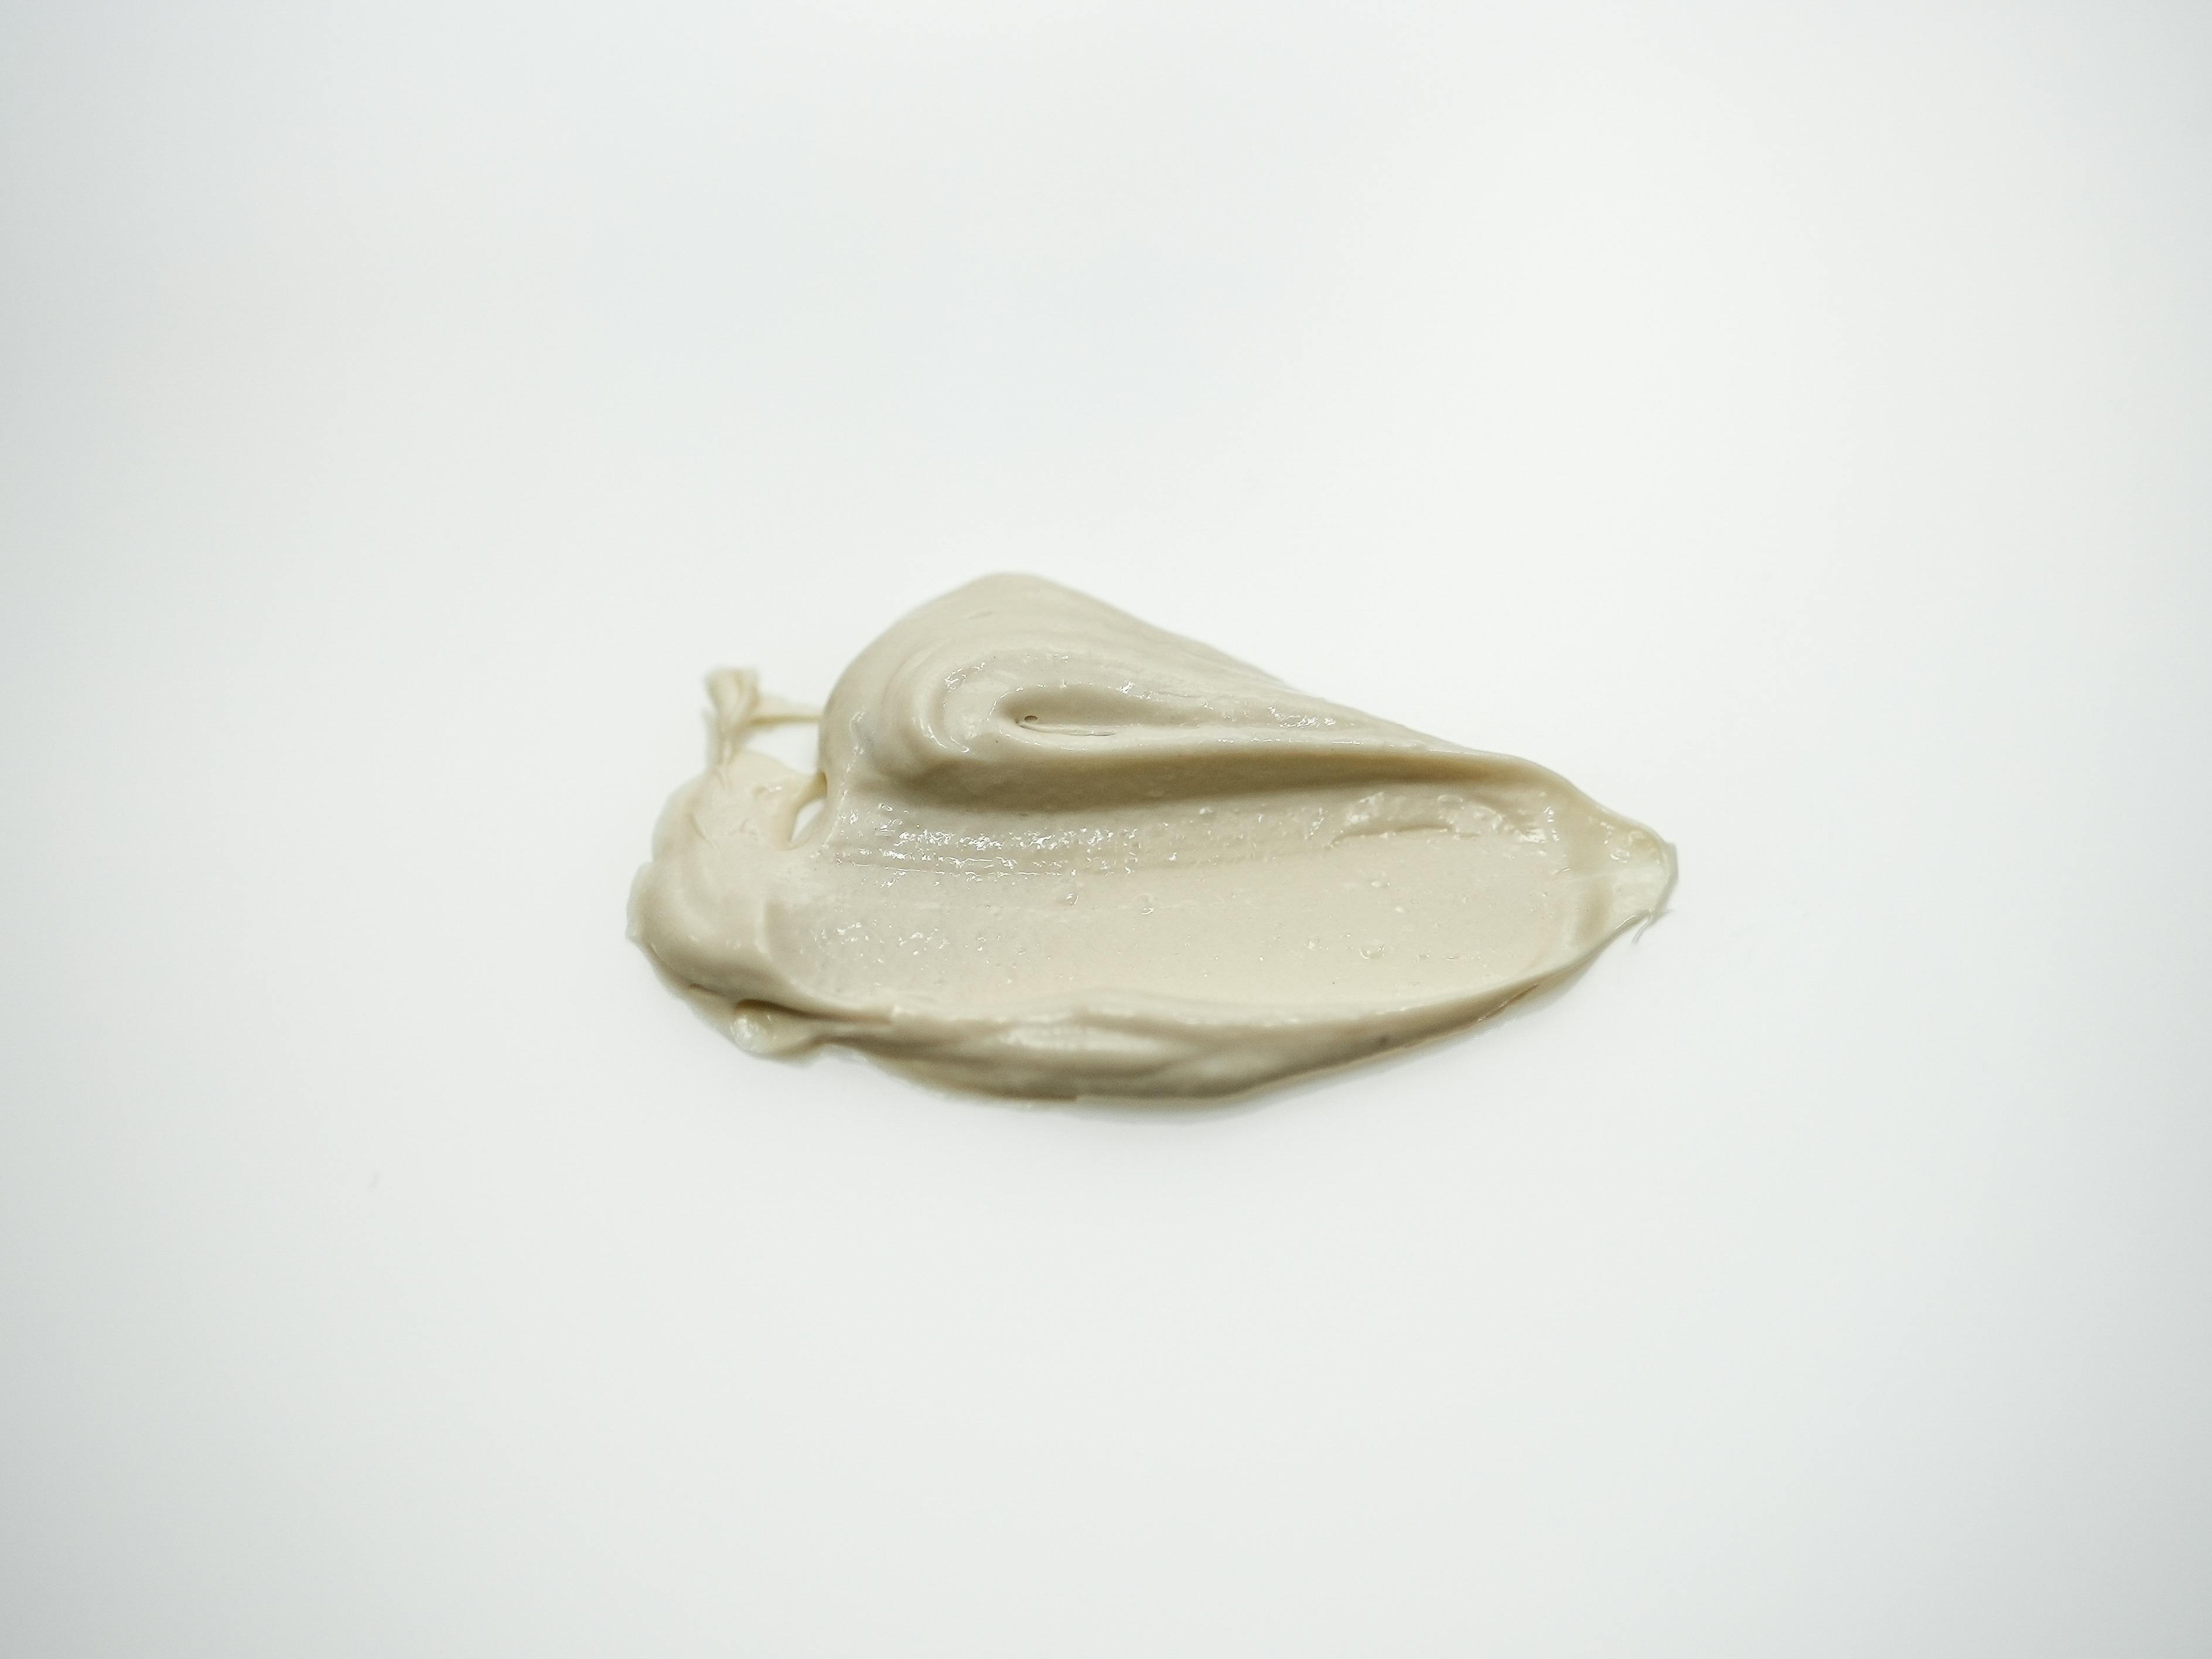 Off-white putty on a white background